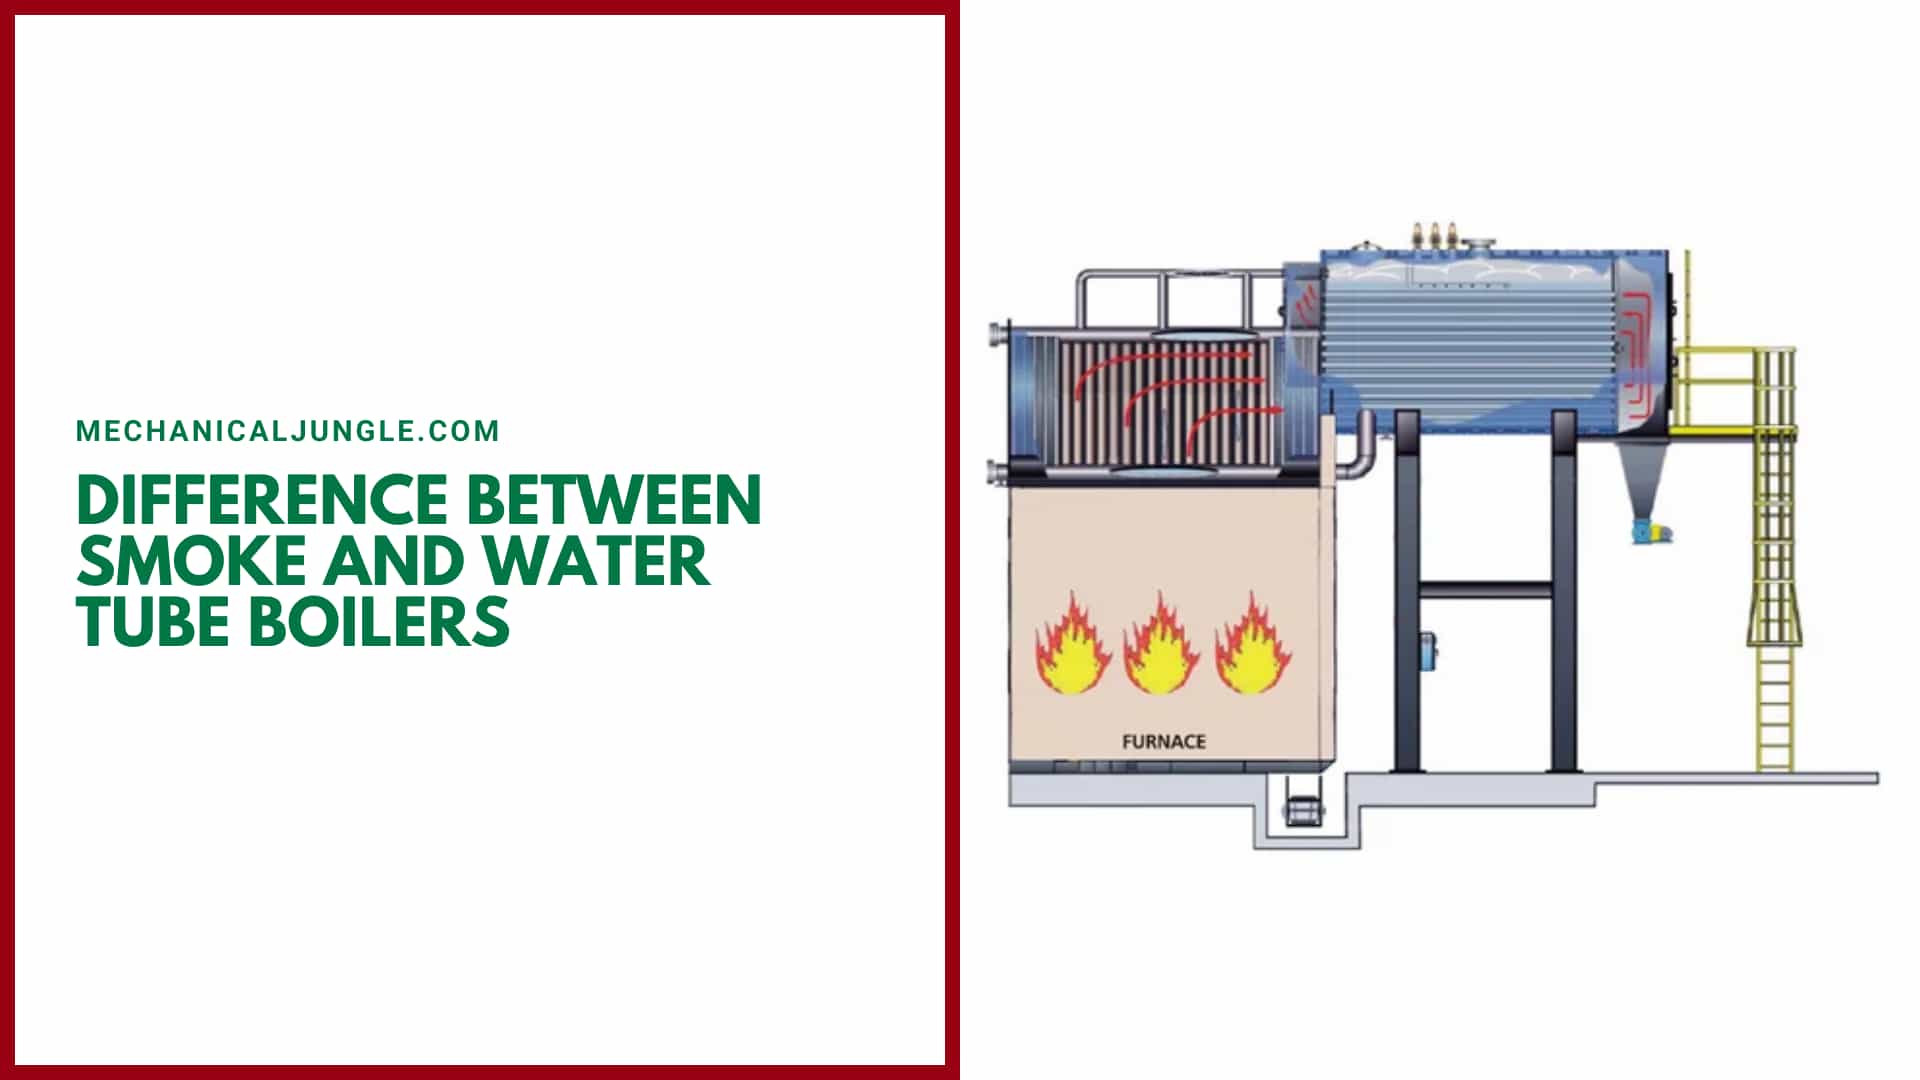 Difference Between Smoke and Water Tube Boilers